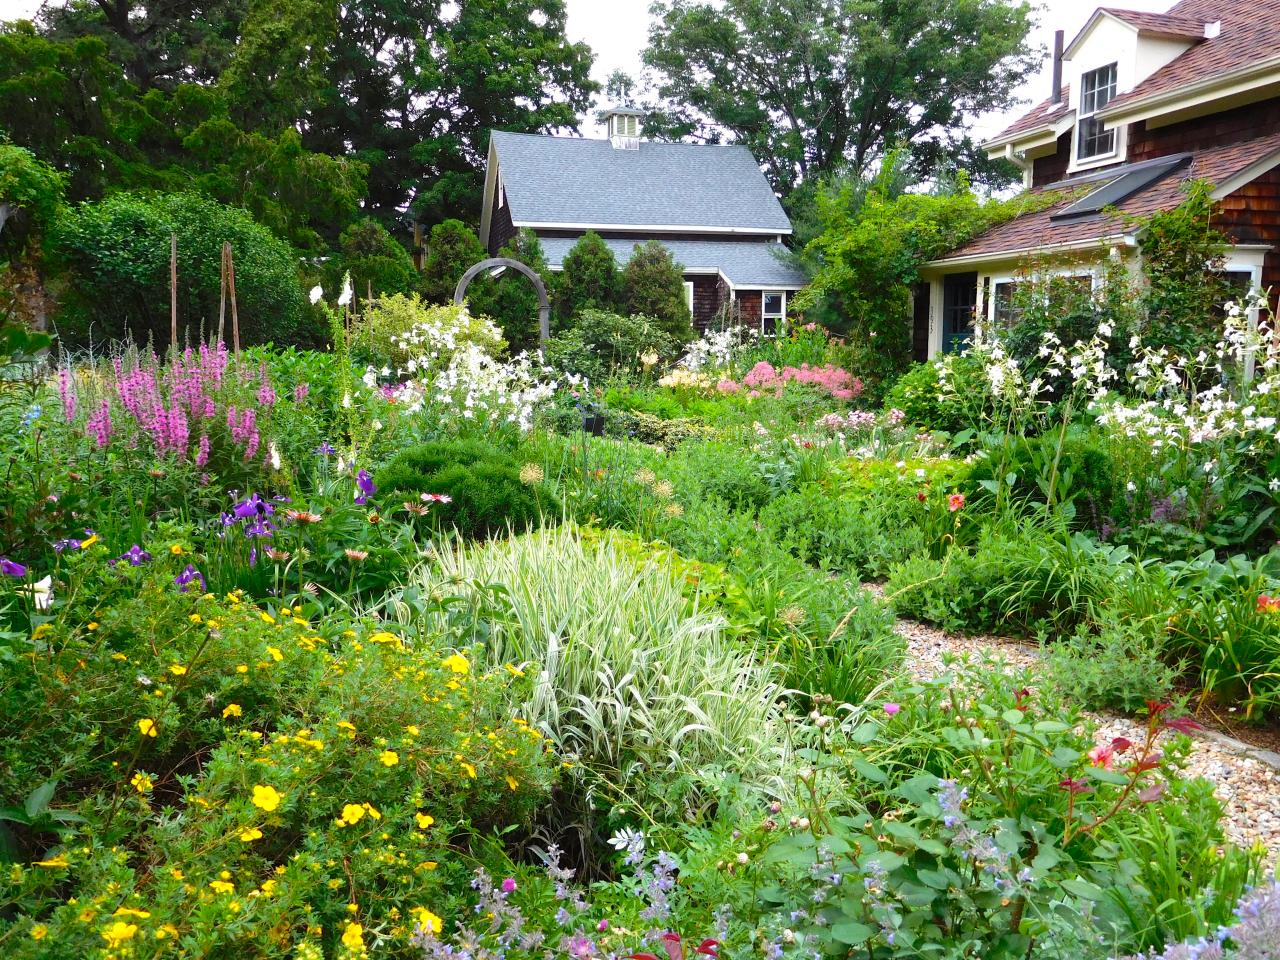 Better Homes and Gardens Books and Planting Books: For Beginners
